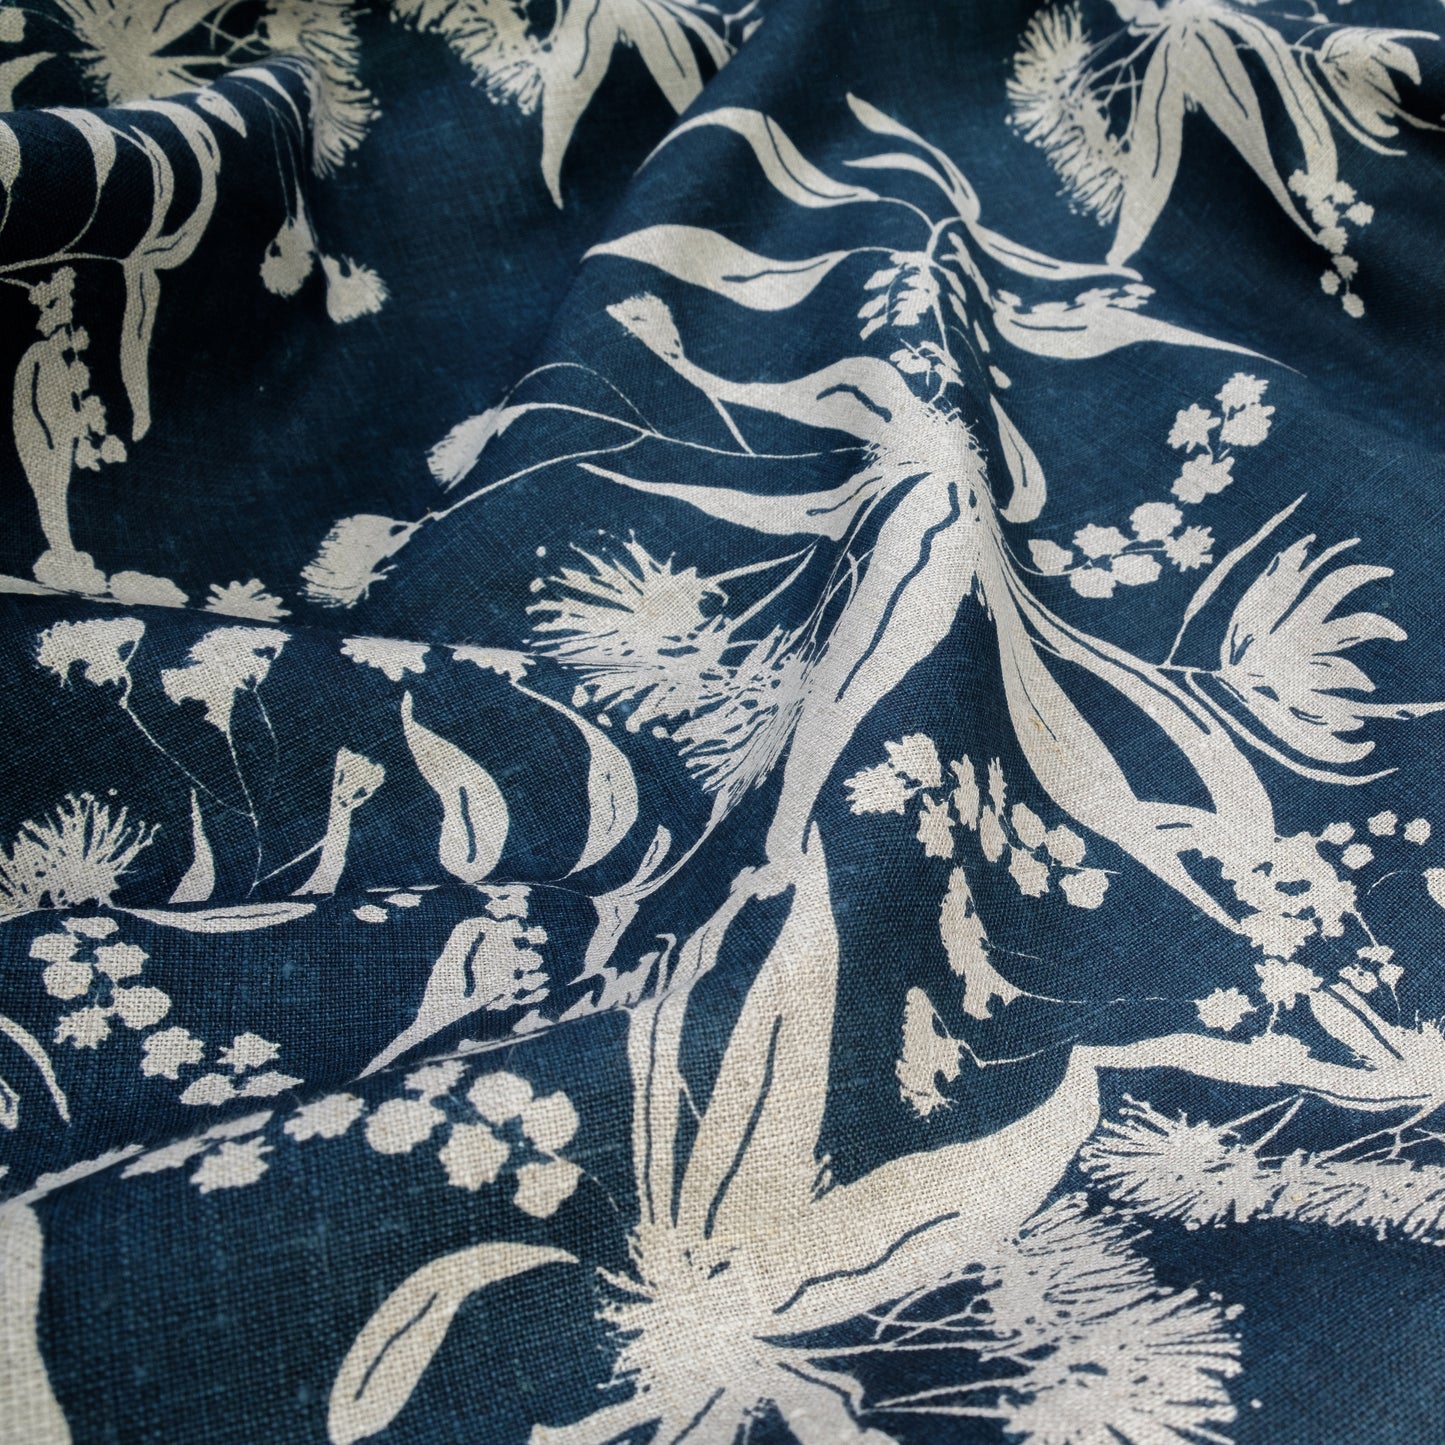 Forager's delight pattern in indigo screenprinted on flax linen.  Designed and screenprinted by Femke Textiles in Melbourne Australia.